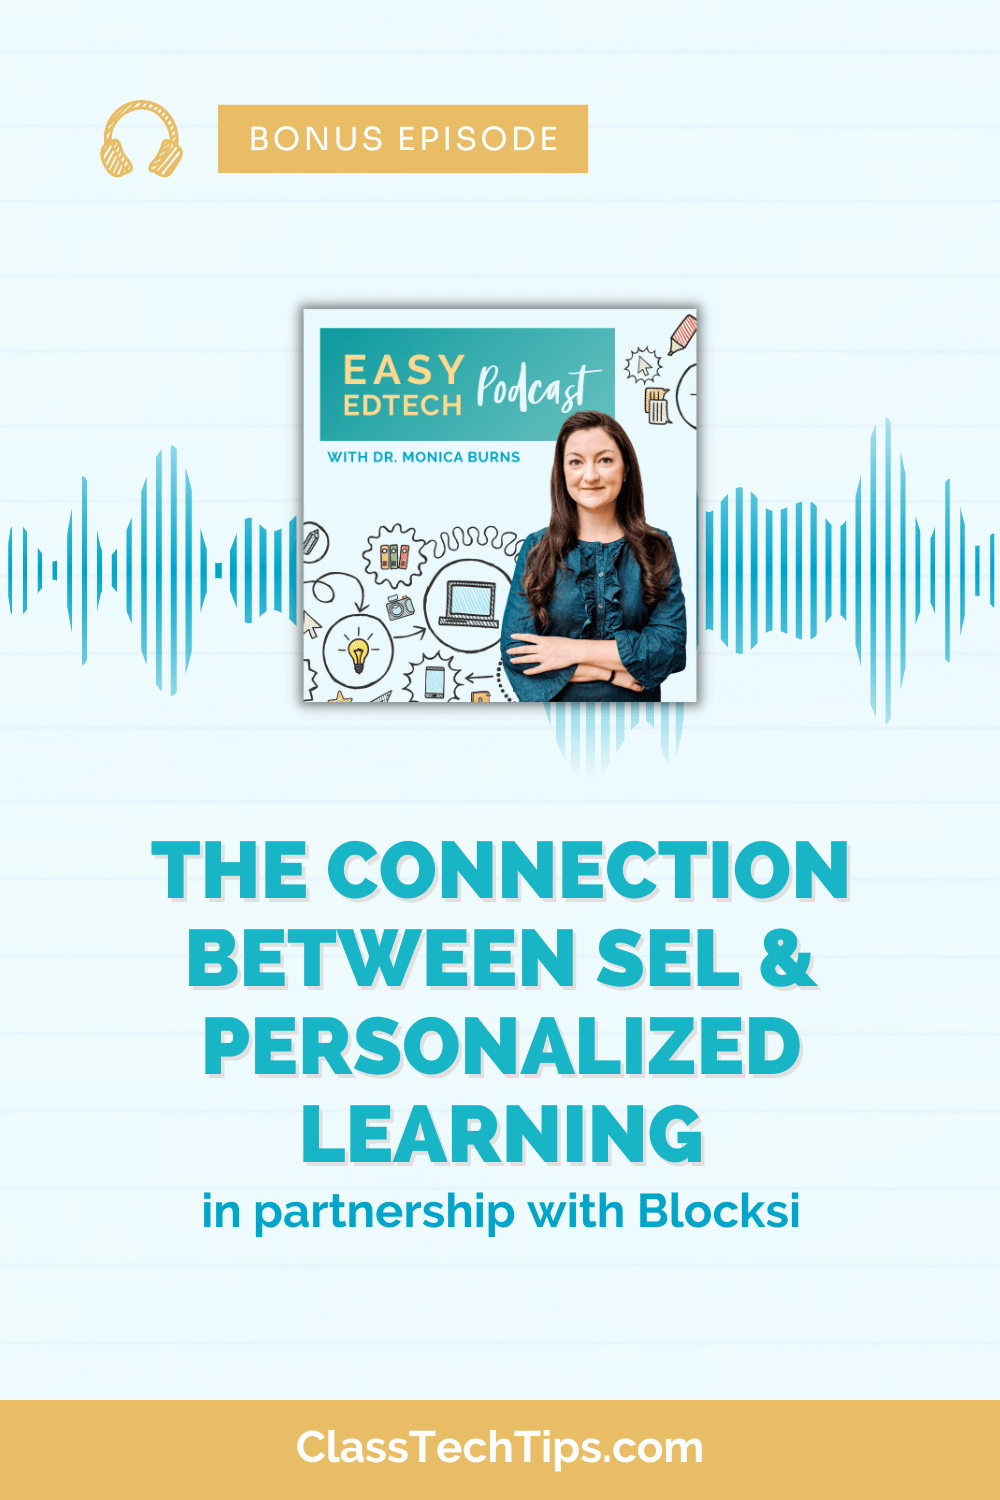 Bonus podcast episode featuring Dr. Monica Burns. It highlights the topic "THE CONNECTION BETWEEN SEL & PERSONALIZED LEARNING" in large teal letters, with "in partnership with Blocksi" at the bottom. The podcast is titled "EASY EdTech Podcast" with graphic doodles of education symbols around Dr. Burns, who stands smiling, wearing a denim shirt.